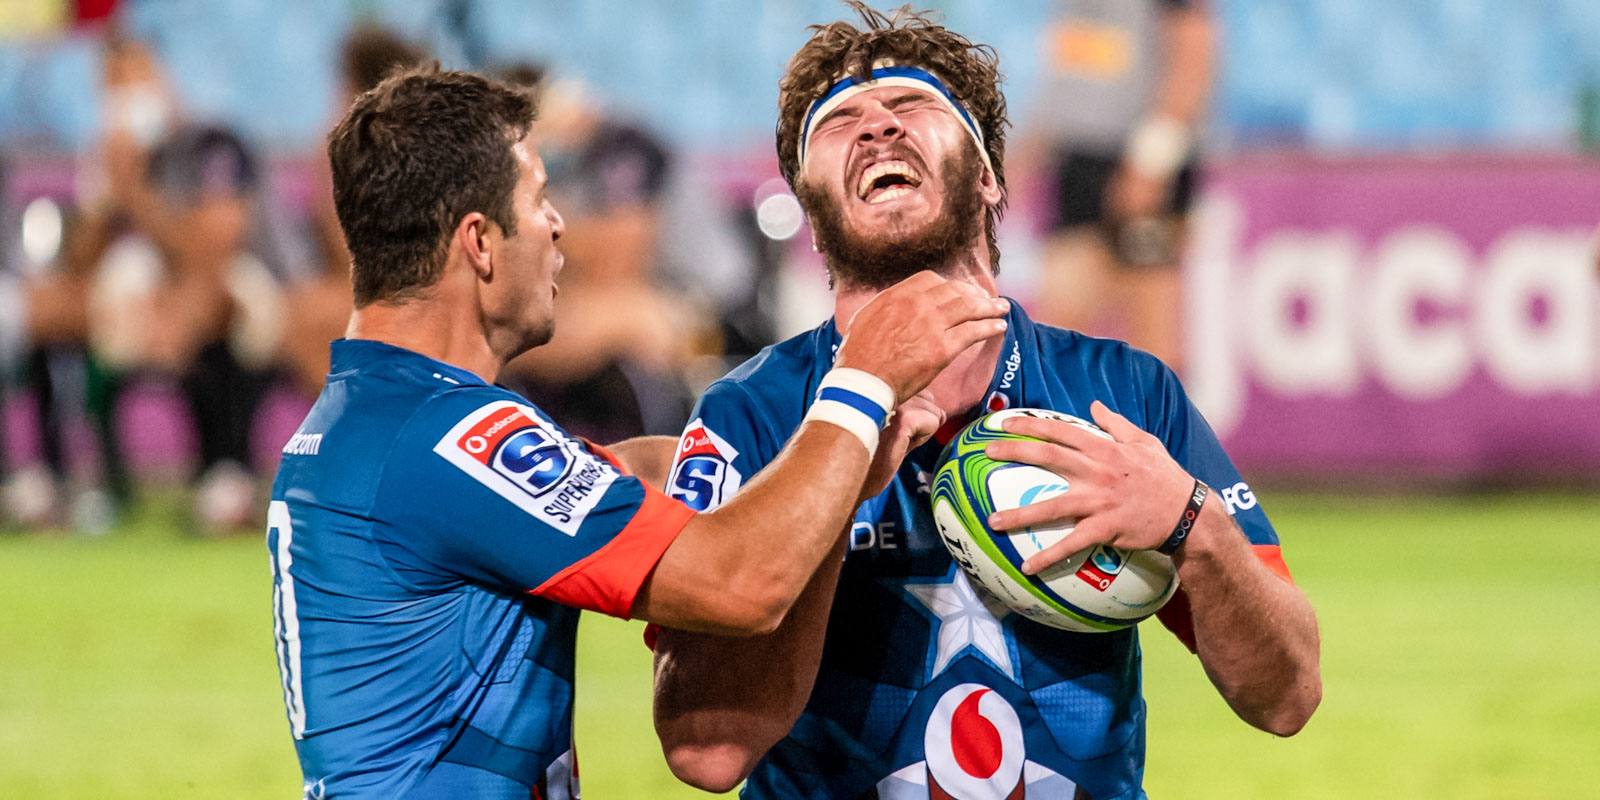 Ruan Nortje celebrates his try with Morne Steyn